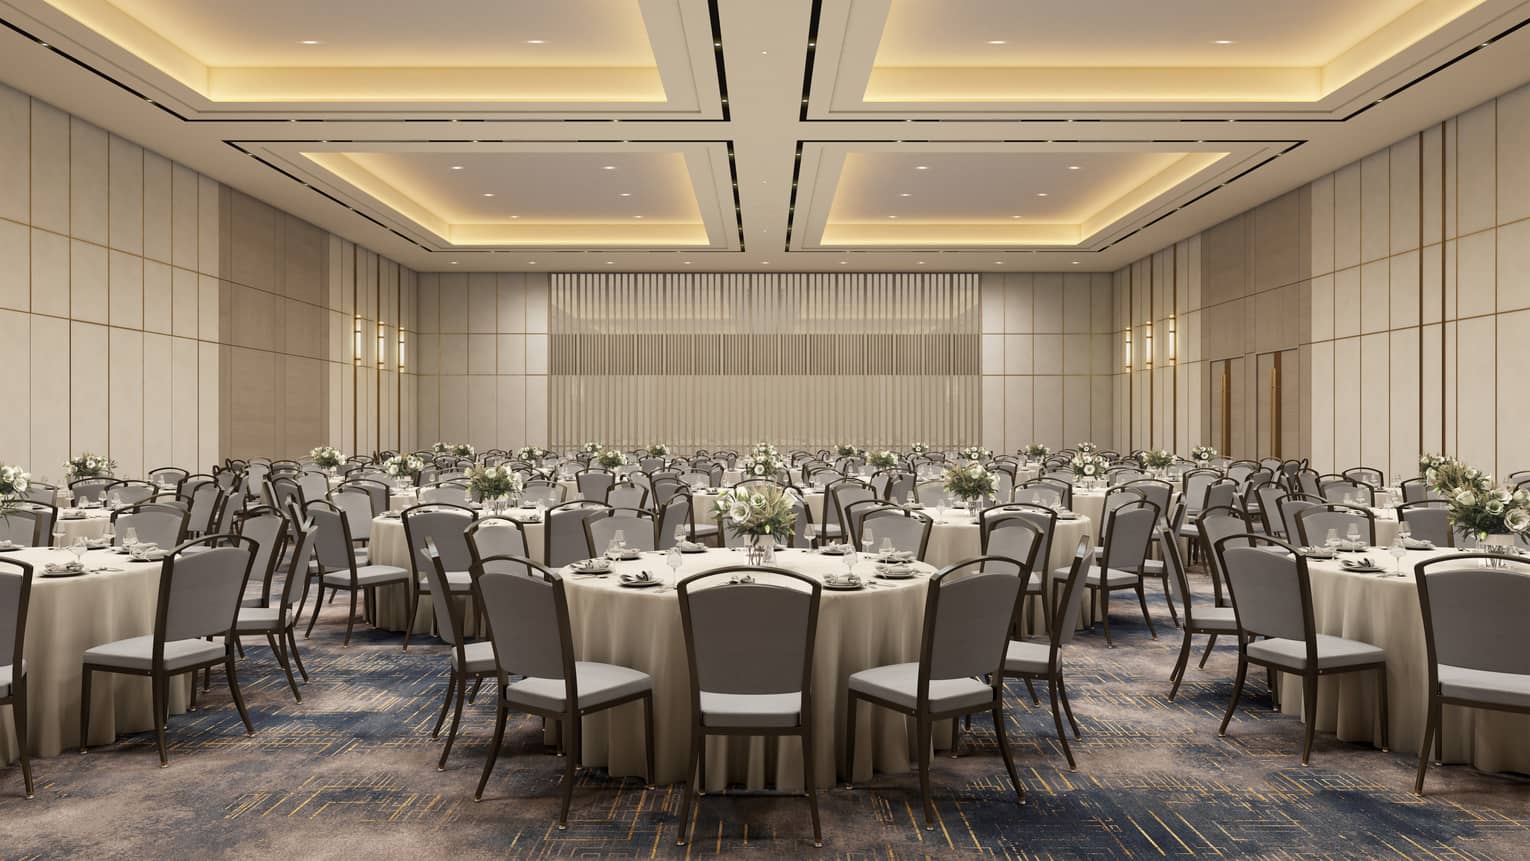 Rendering of an indoor ballroom with banquet tables